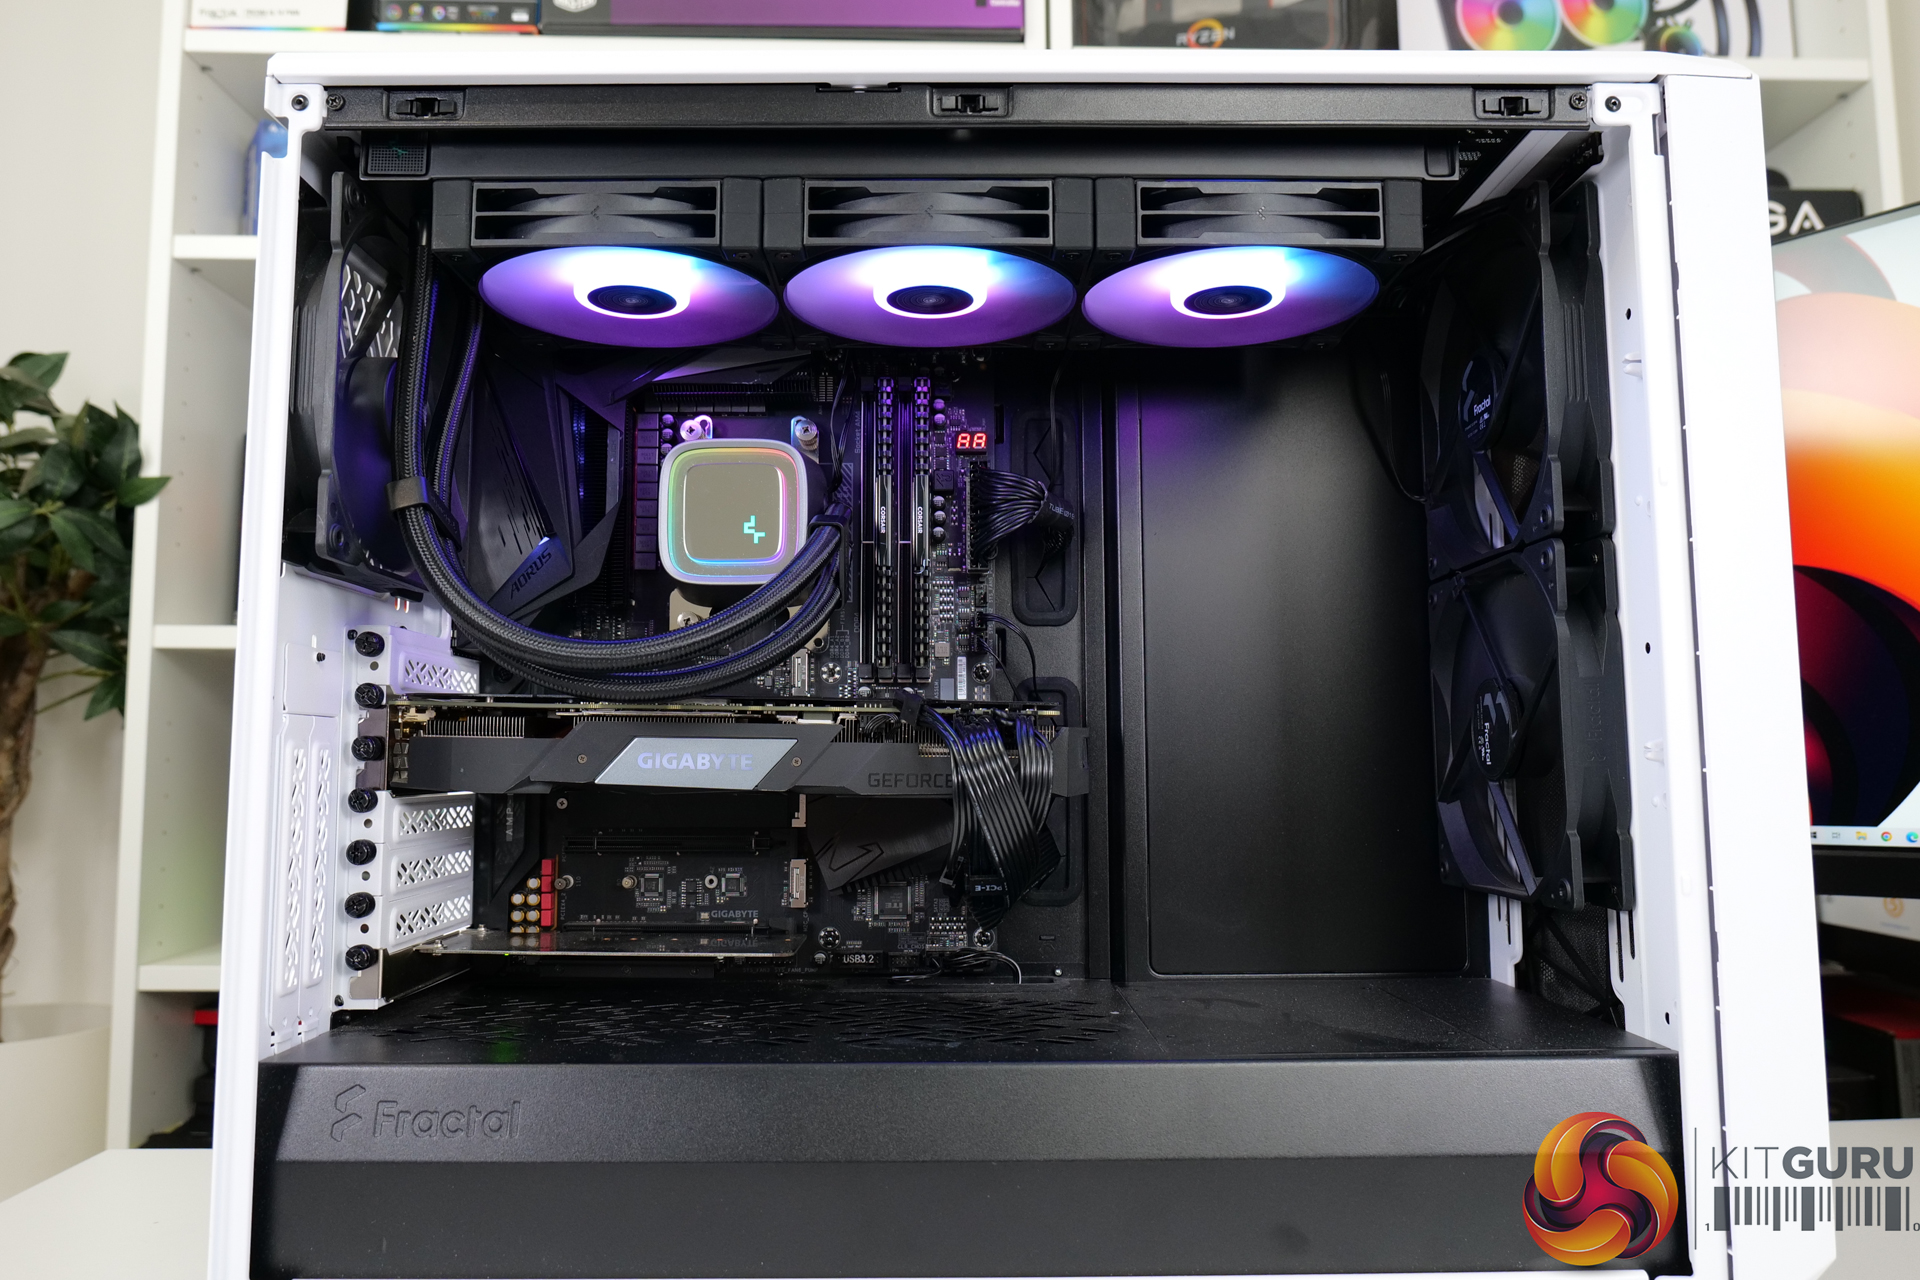 Cooling System DeepCool LS720 RGB White - Photos, Technical